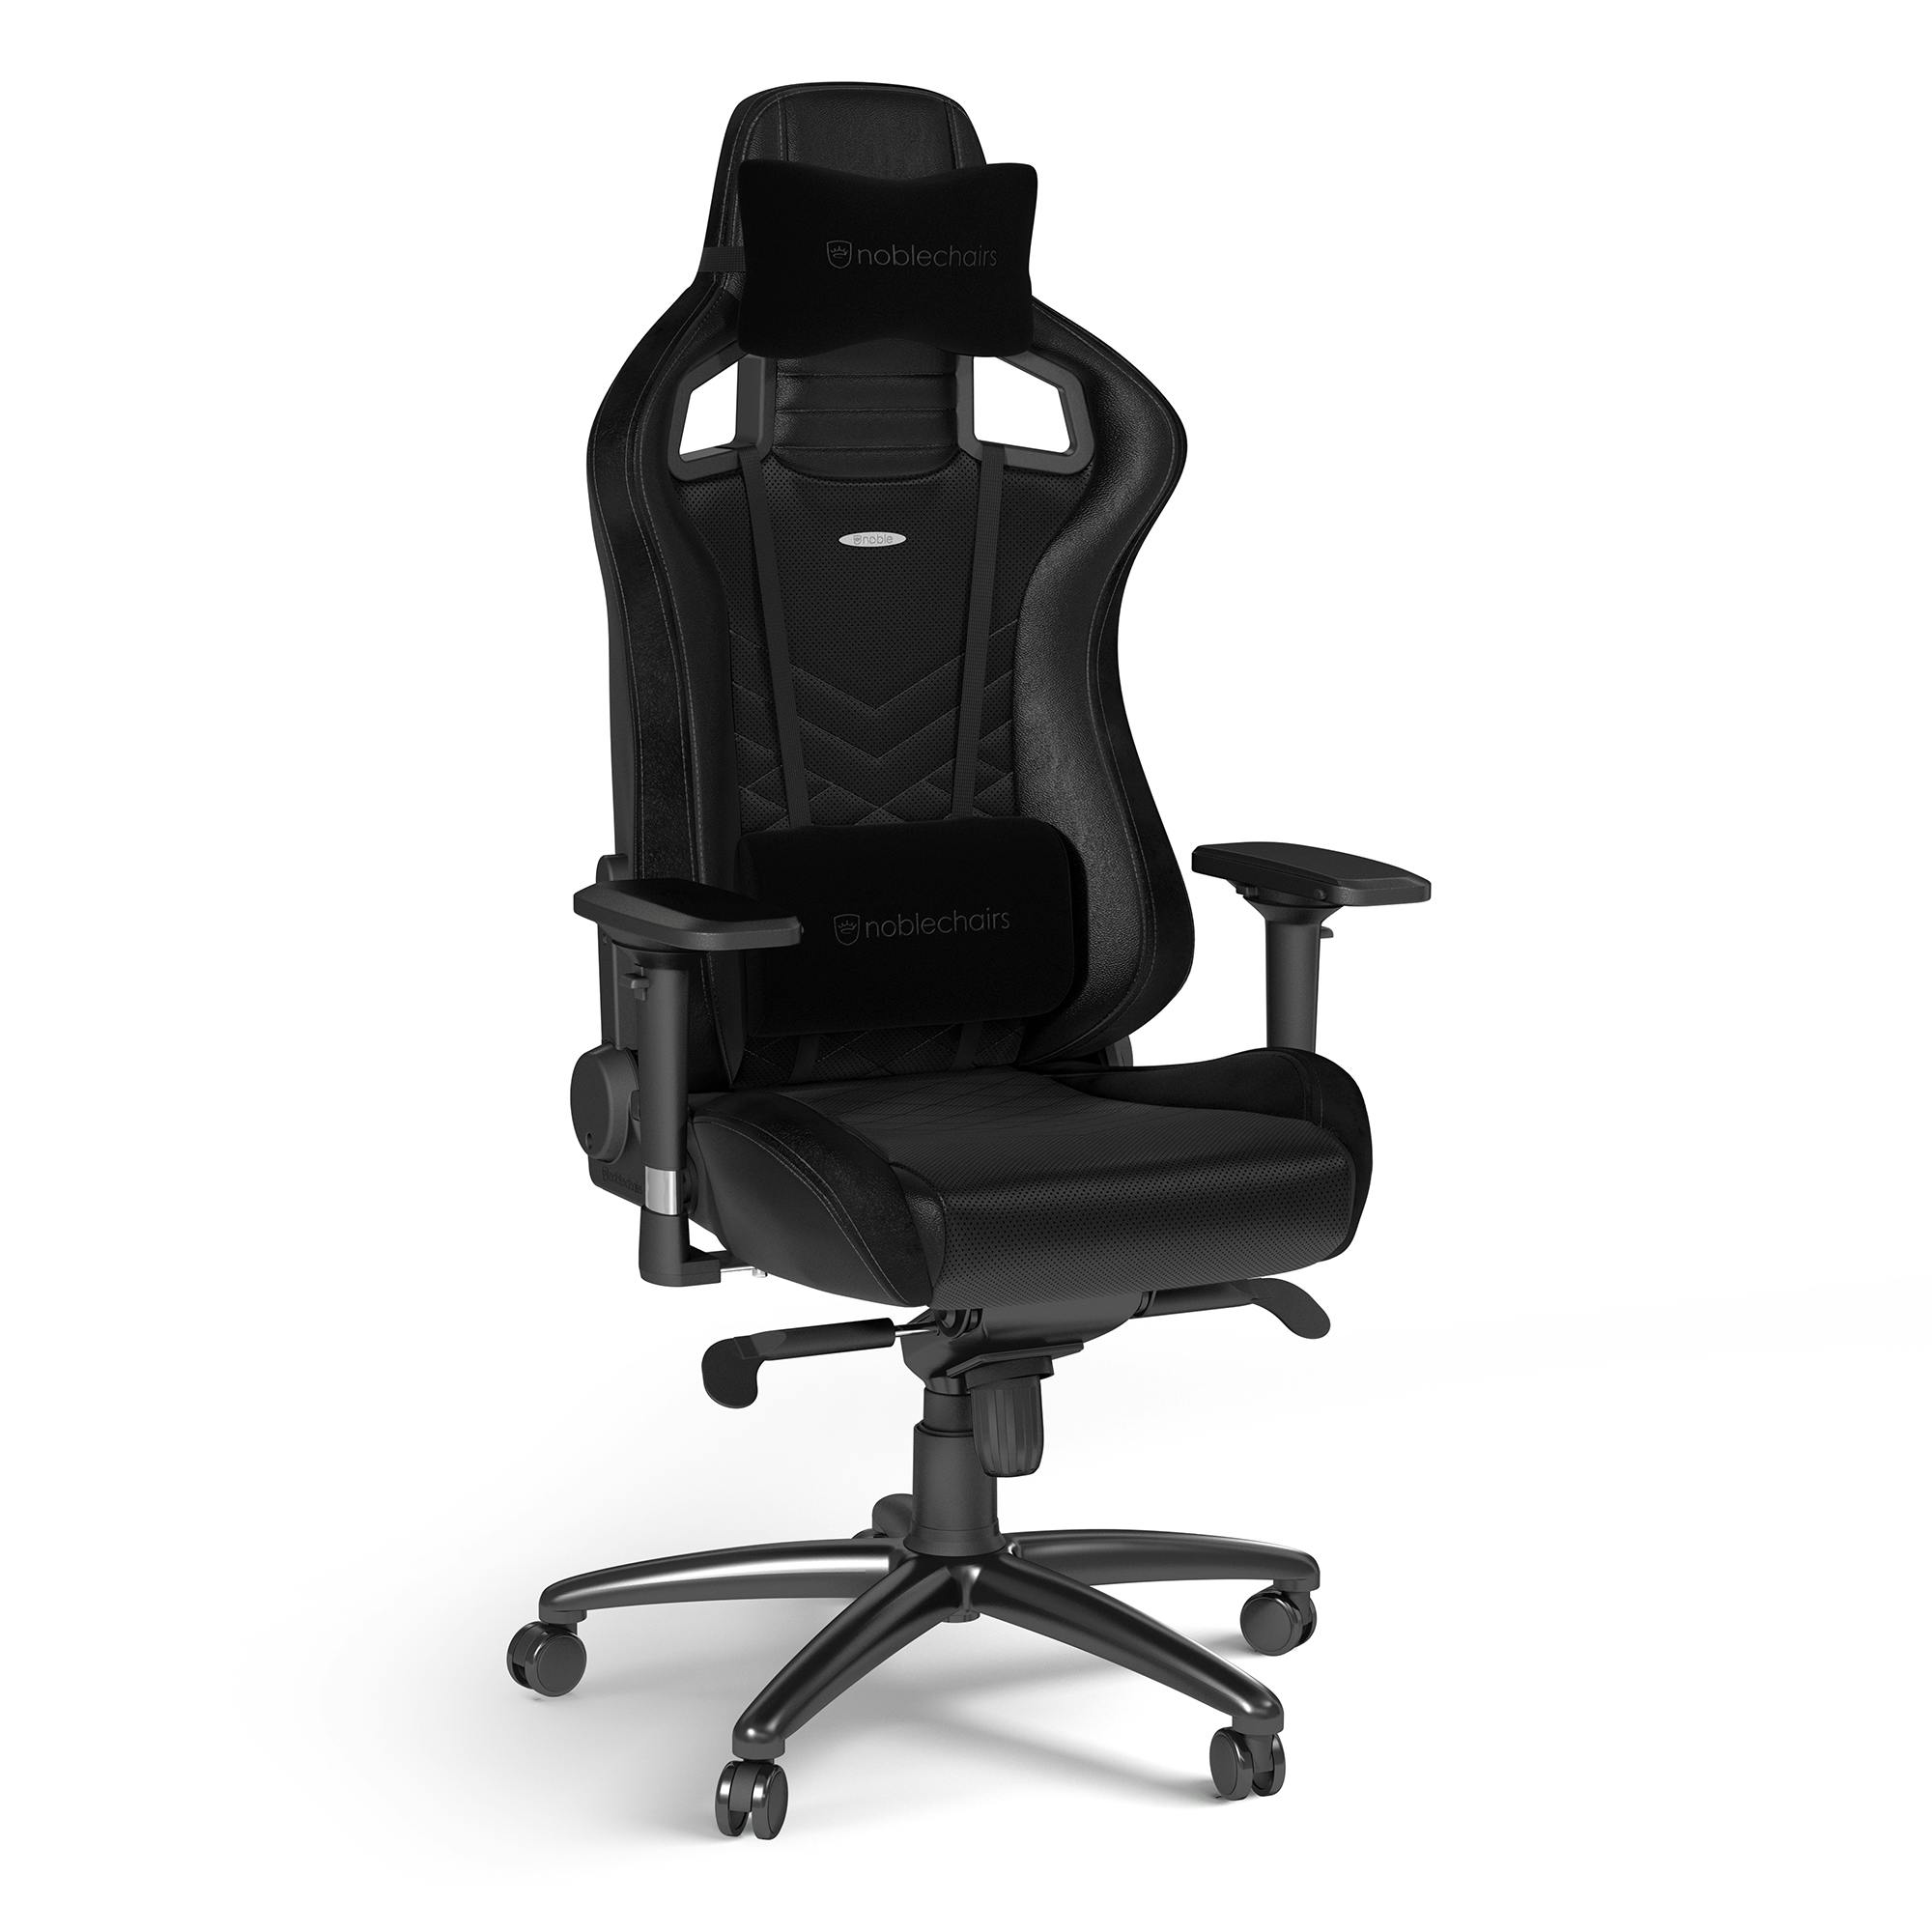 Black noblechairs Epic Gaming Chair 135° Reclinable Desk Chair Office Chair Lumbar Support Cushion 265 lbs Racing Seat Design PU Faux Leather